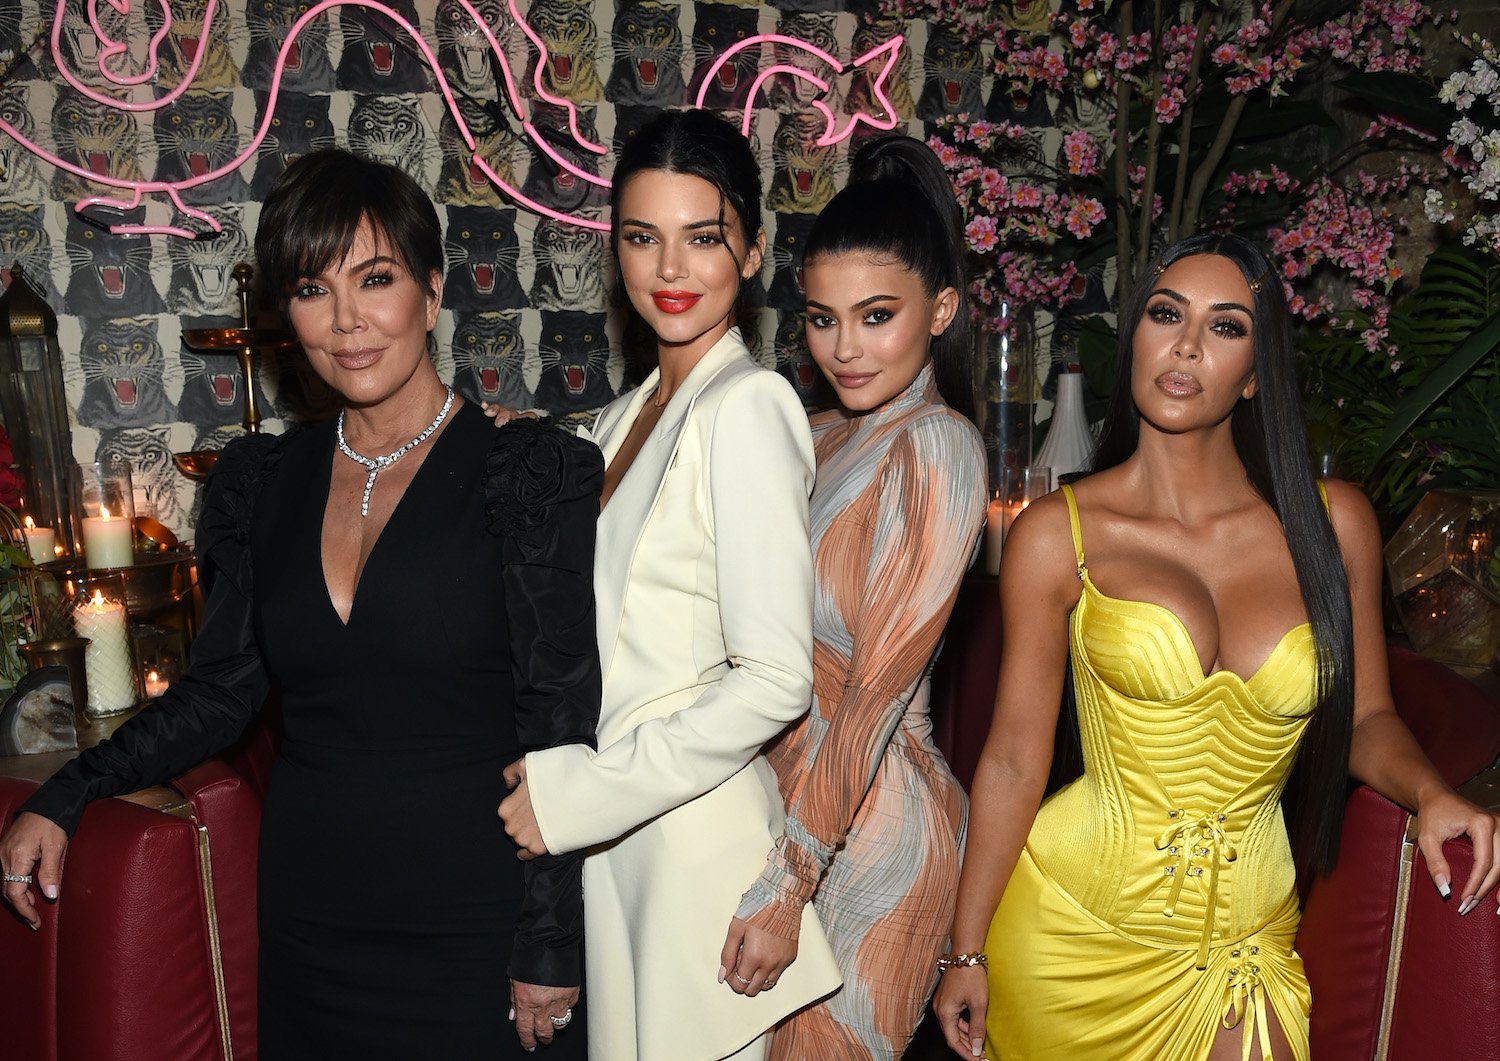 Kris Jenner, Kendall Jenner, Kylie Jenner, and Kim Kardashian attend a dinner hosted by The Business of Fashion